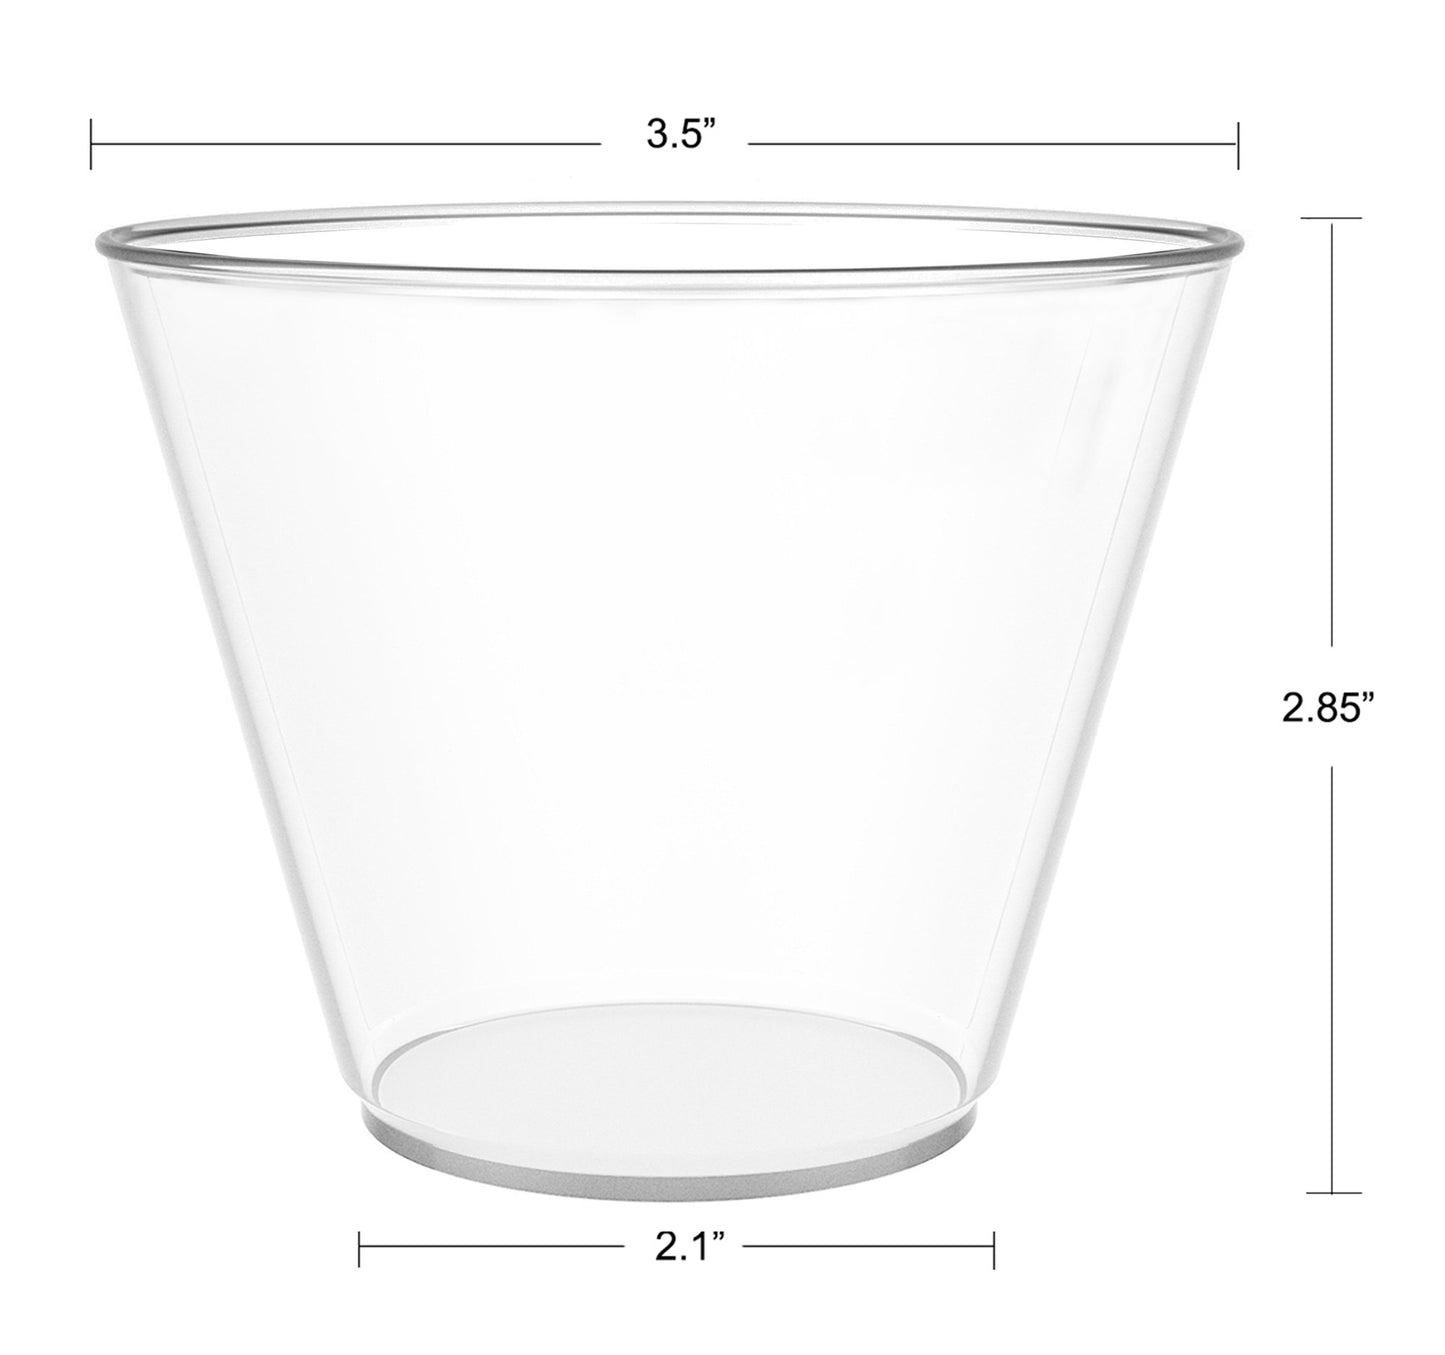 JL Prime 100 Clear Plastic Cups, 9 Oz Heavy Duty Reusable Disposable Clear Plastic Cups, Old Fashioned Tumblers, Hard Plastic Drinking Cups for Party and Wedding